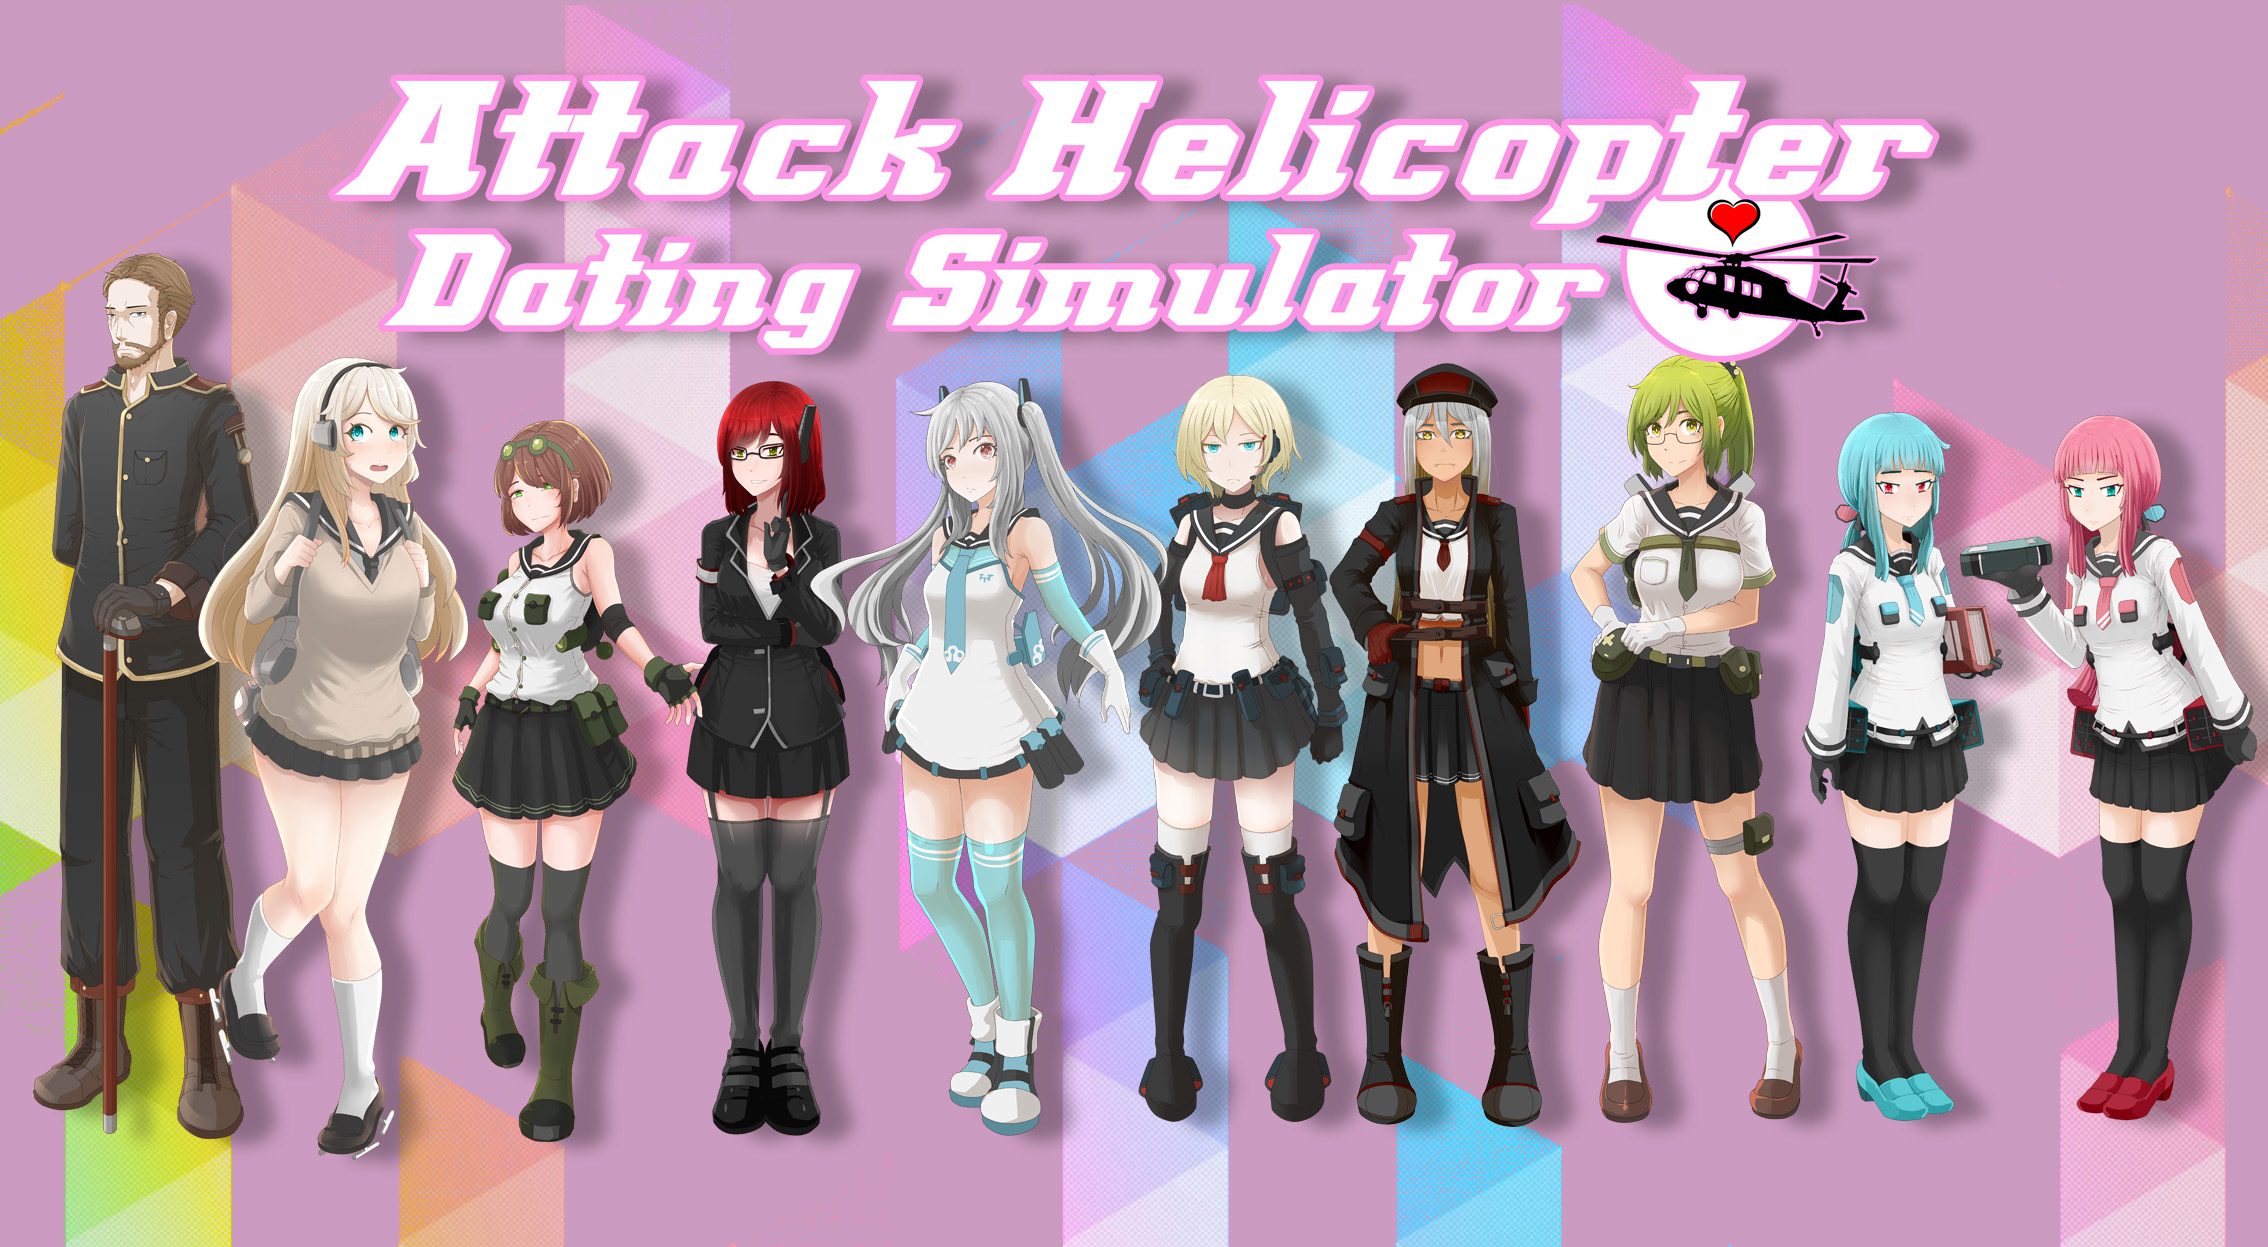 Attack Helicopter Dating Simulator Director's Cut